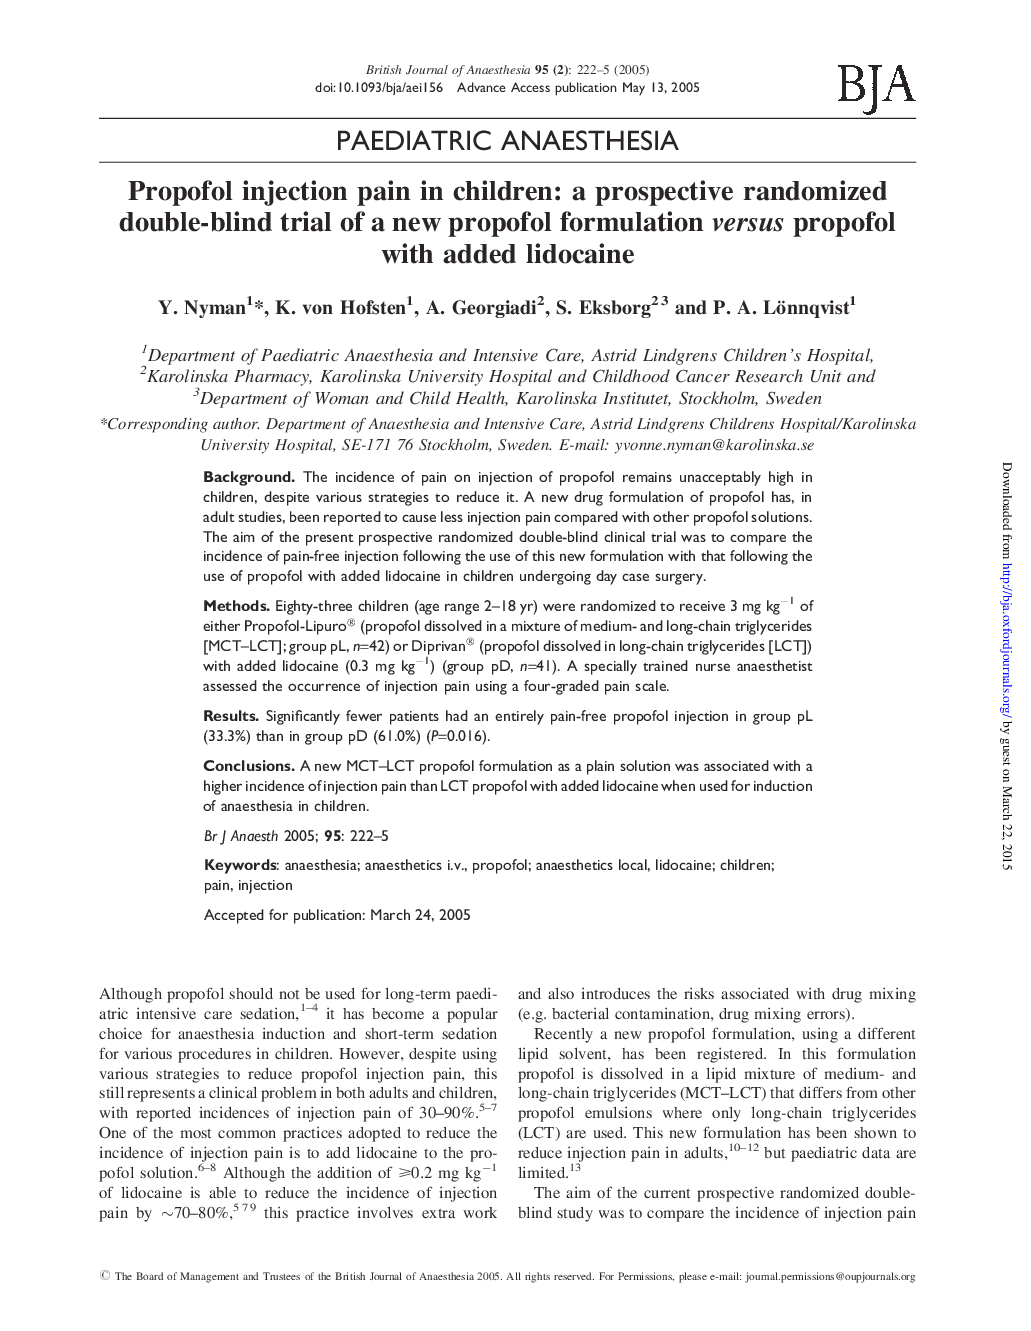 Propofol injection pain in children: a prospective randomized double-blind trial of a new propofol formulation versus propofol with added lidocaine